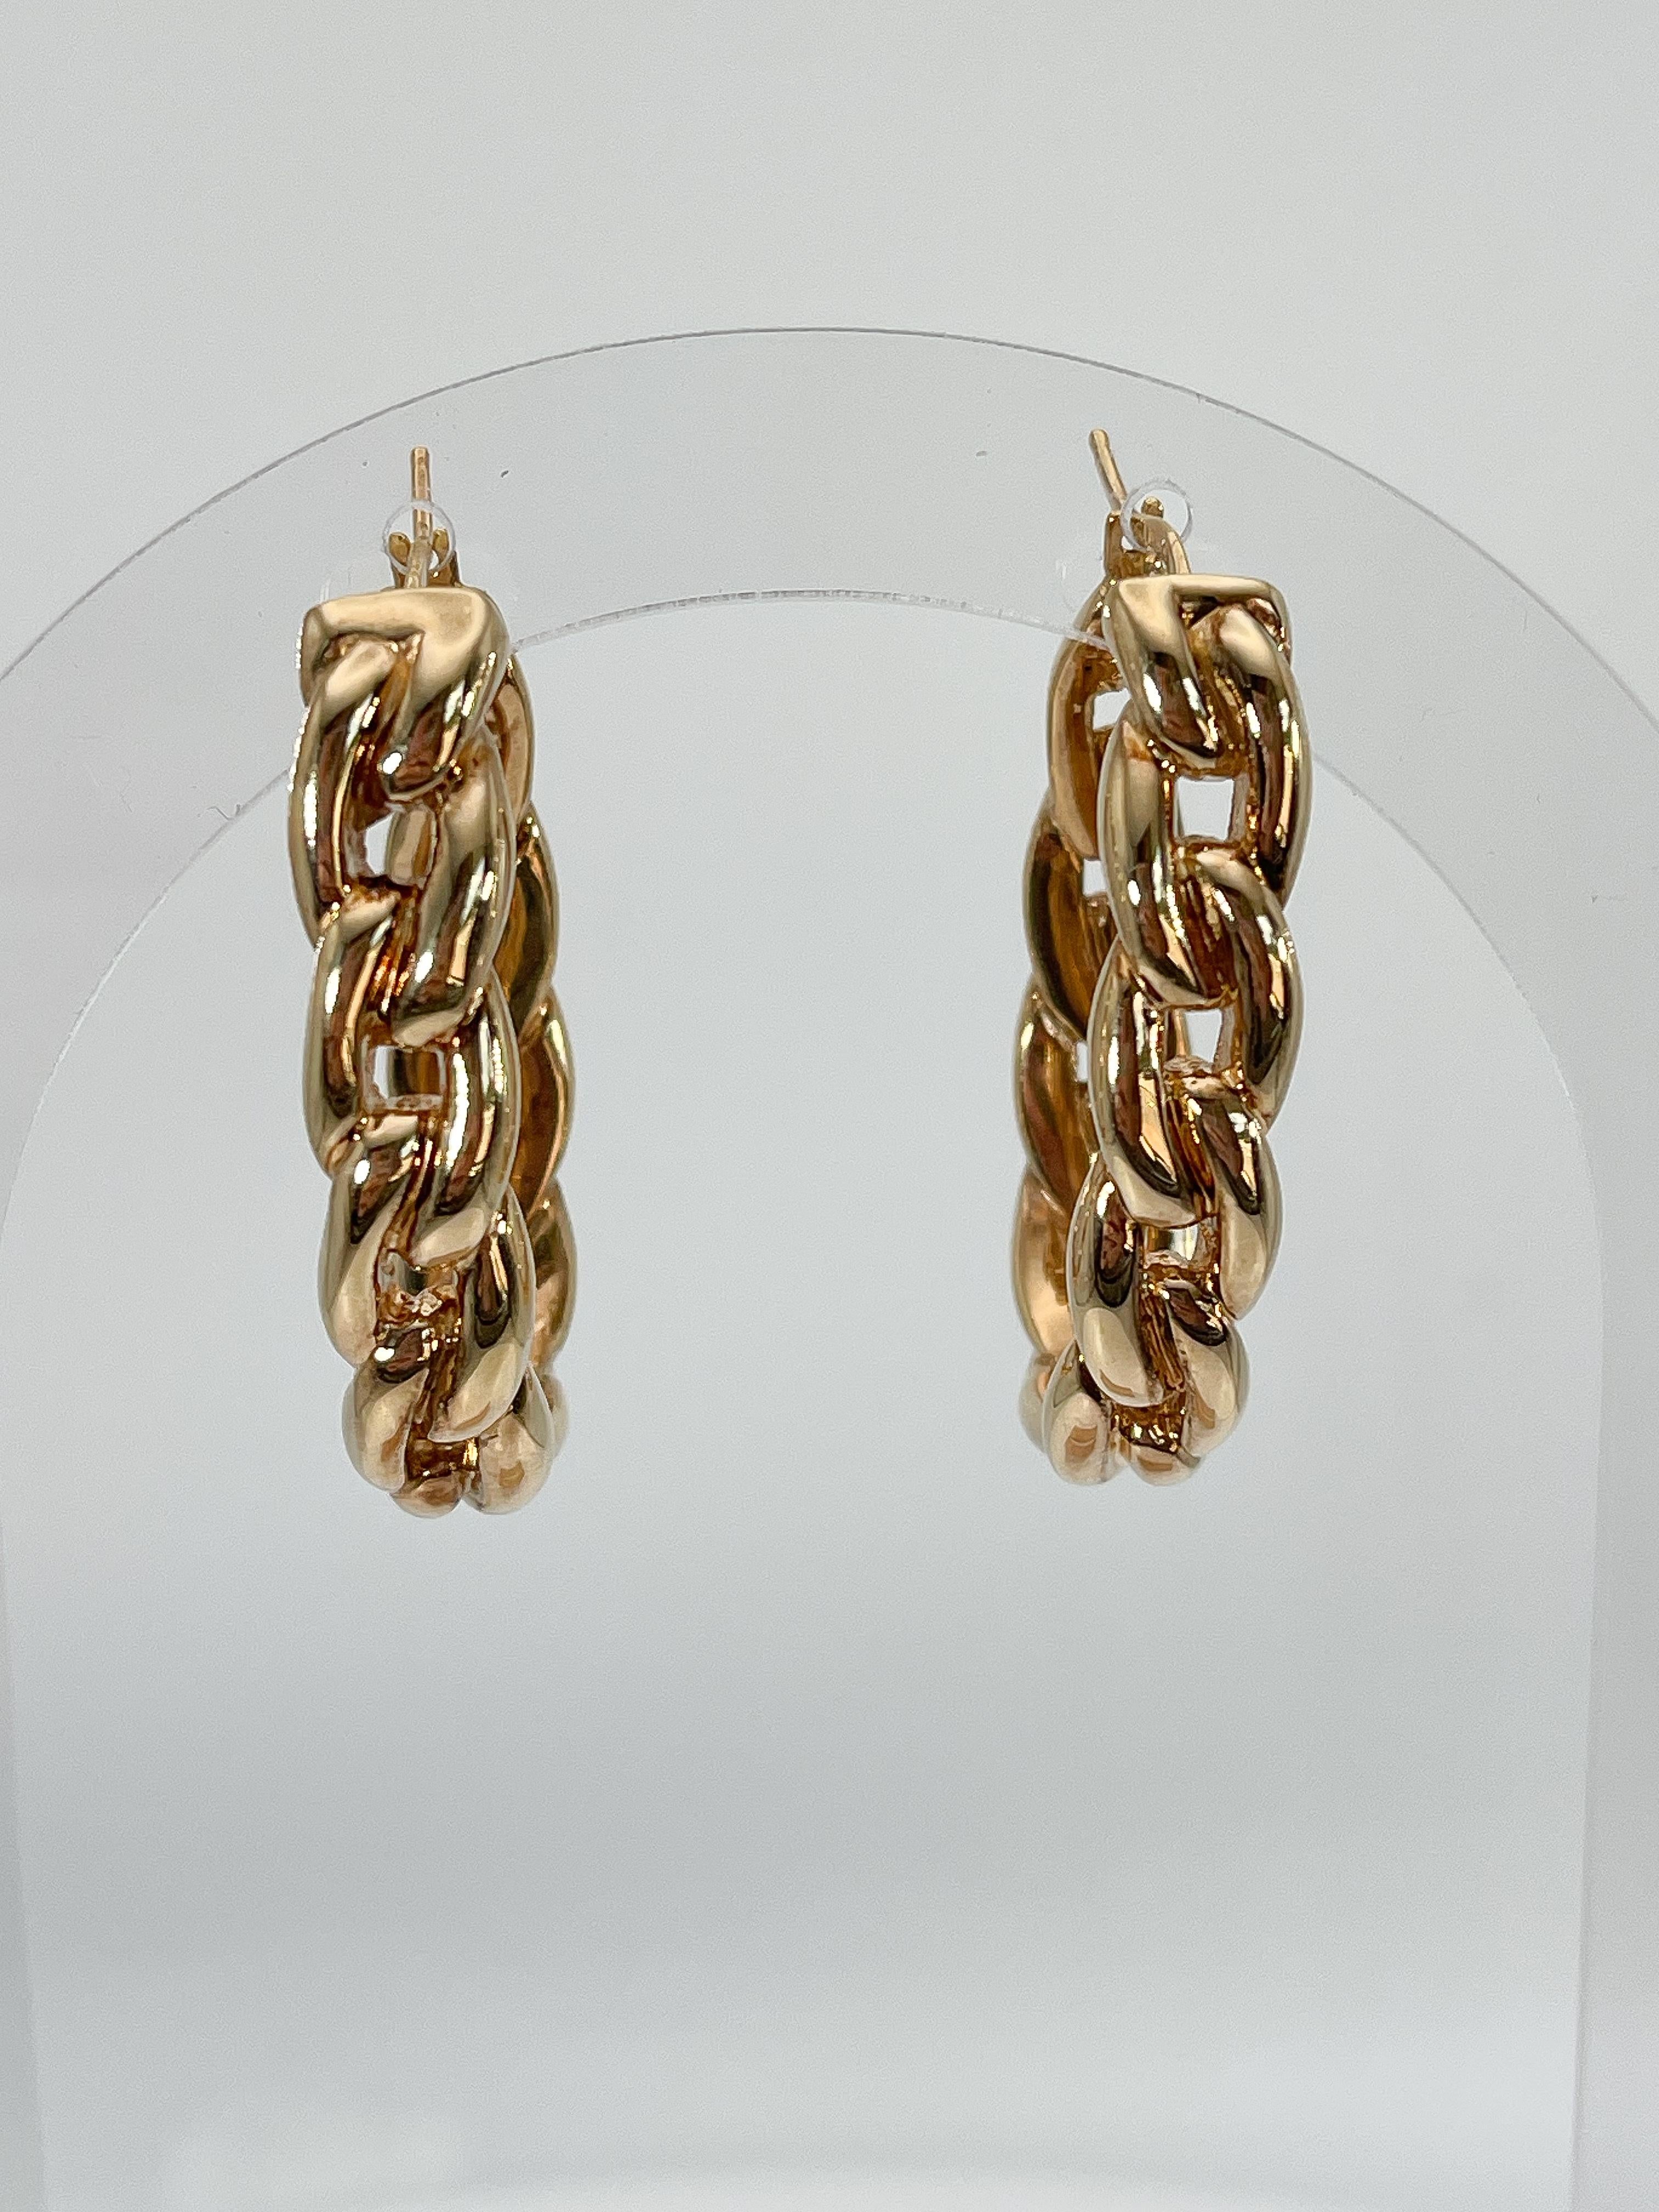 14k yellow gold thick chain hoop earrings. These earrings have a horseshoe back to open and close earrings, they measure to be 38mm x 7.5mm, and they have a total weight of 5.8 grams. 